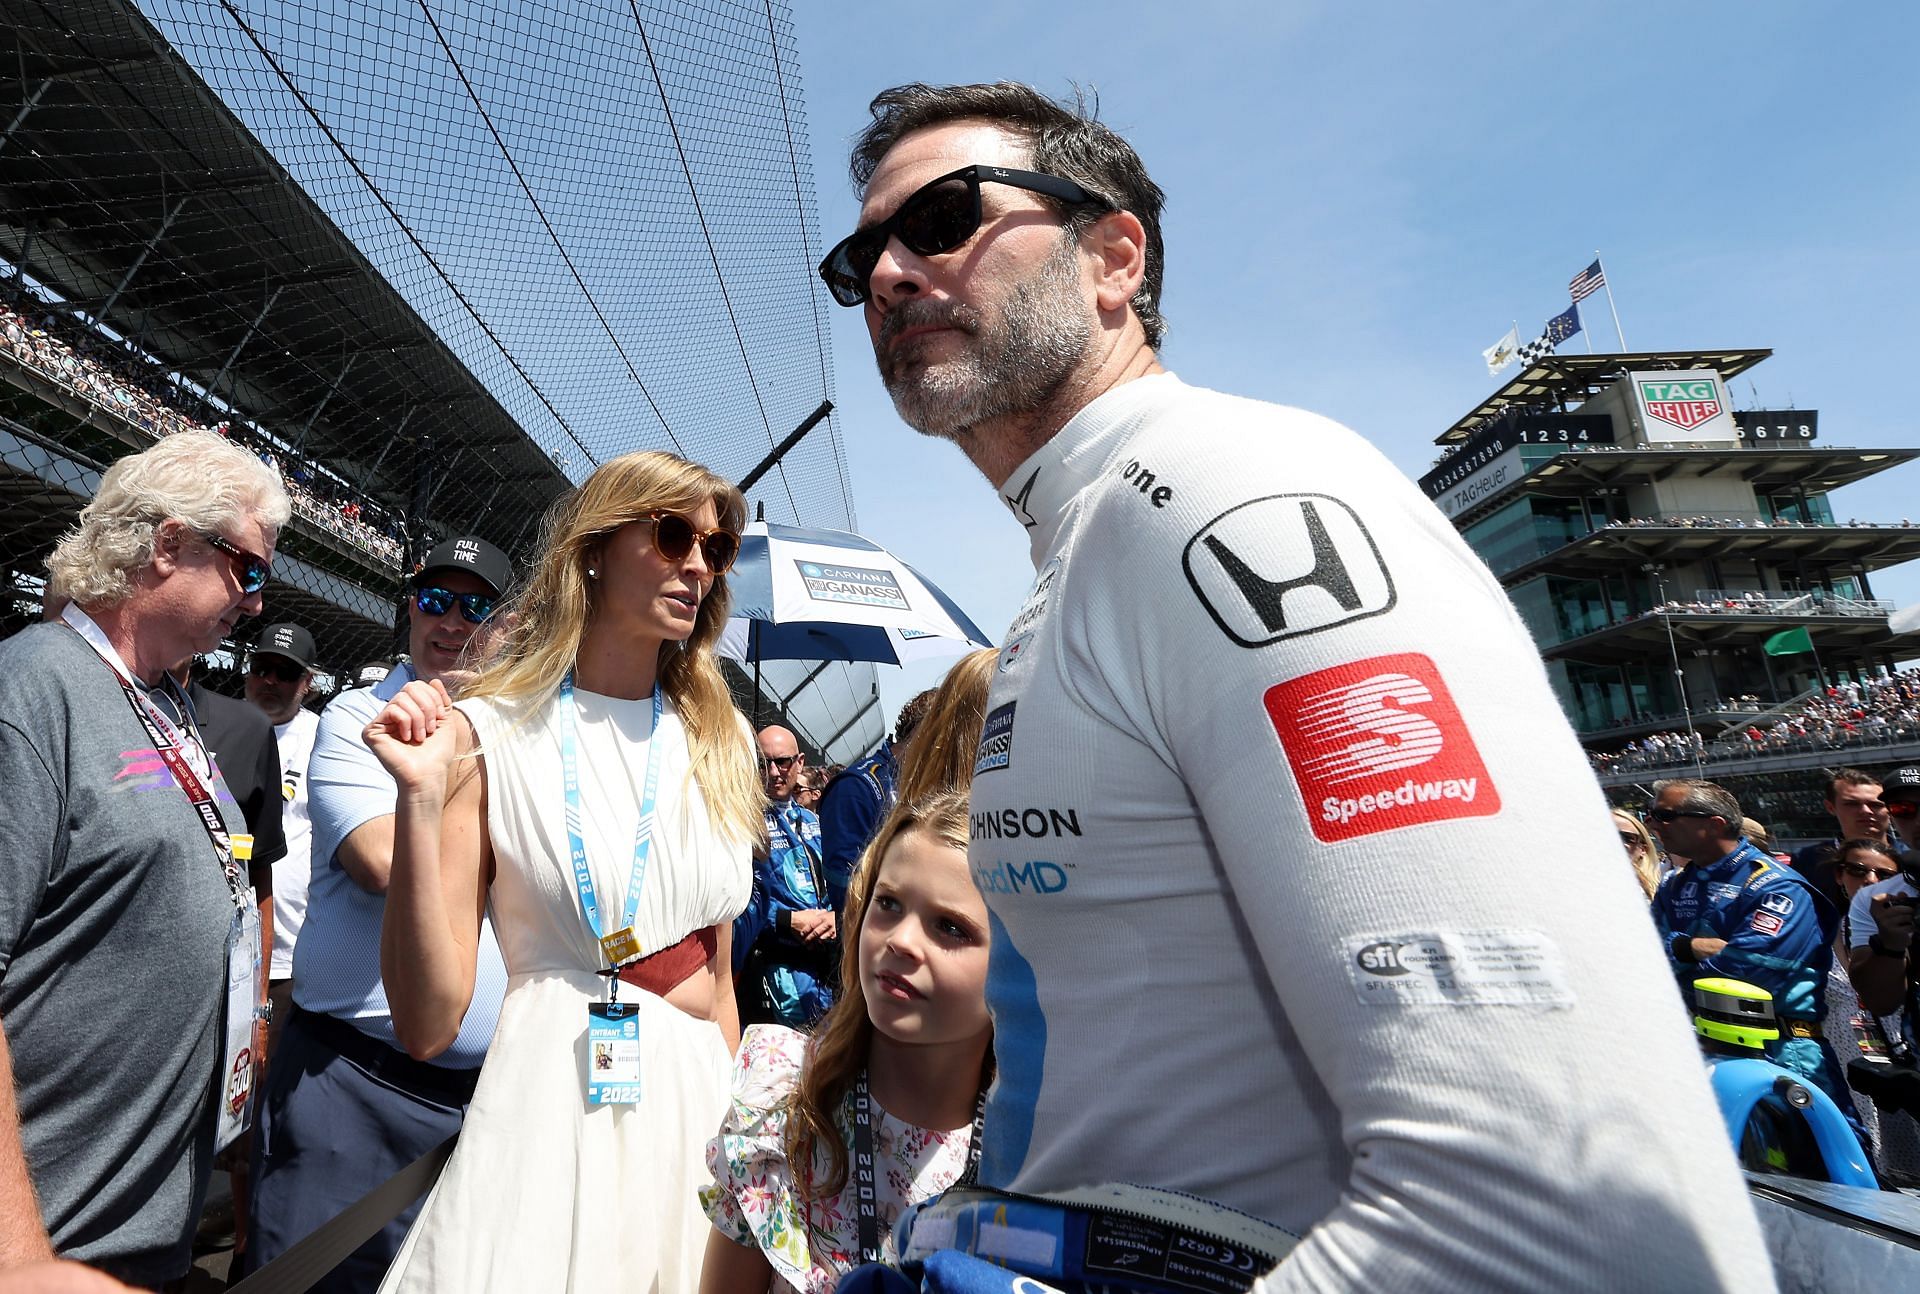 Jimmie Johnson prepares to get in his car before the 106th running of The Indy 500 at Indianapolis Motor Speedway in Indiana (Photo by Jamie Squire/Getty Images)